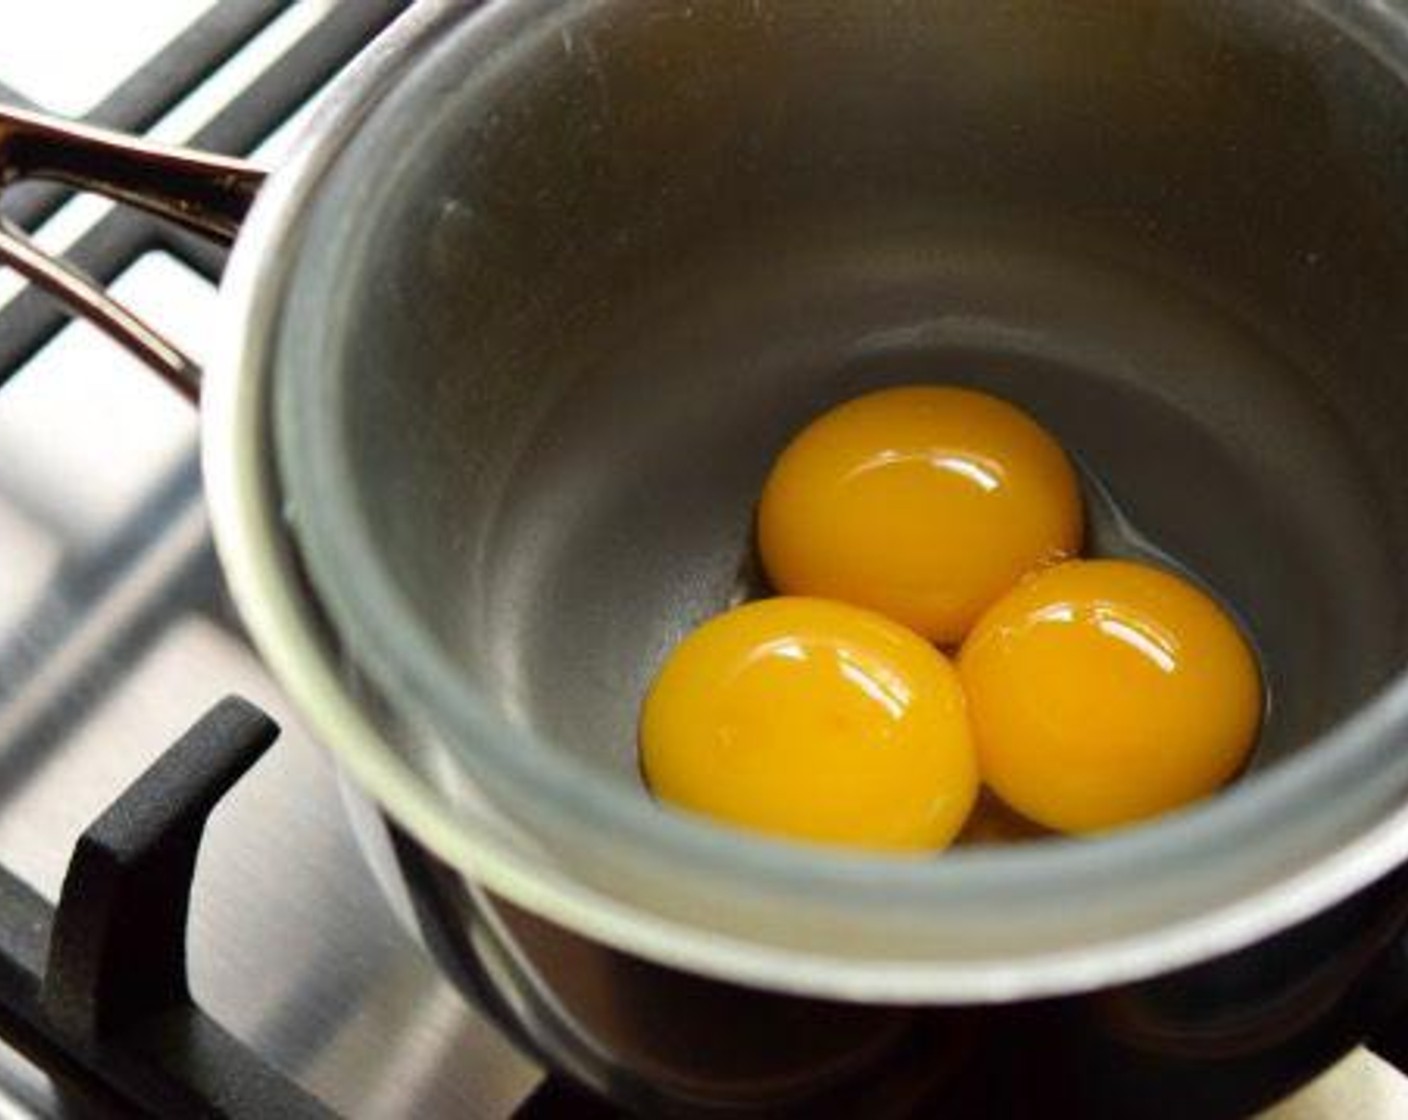 step 1 In a bain marie or double-boiler, add just the yolks of the Eggs (3) and juice from Lemon (1). Using a small whisk, beat the yolks and lemon juice together until they form a sabayon. This happens when the lemon juice emulsifies the egg yolks and they thicken and take on a lighter hue. To know when you’ve reached this point, the mixture should cling to the whisk and you should be able to see the bottom of the glass bowl when you drag your whisk through it.